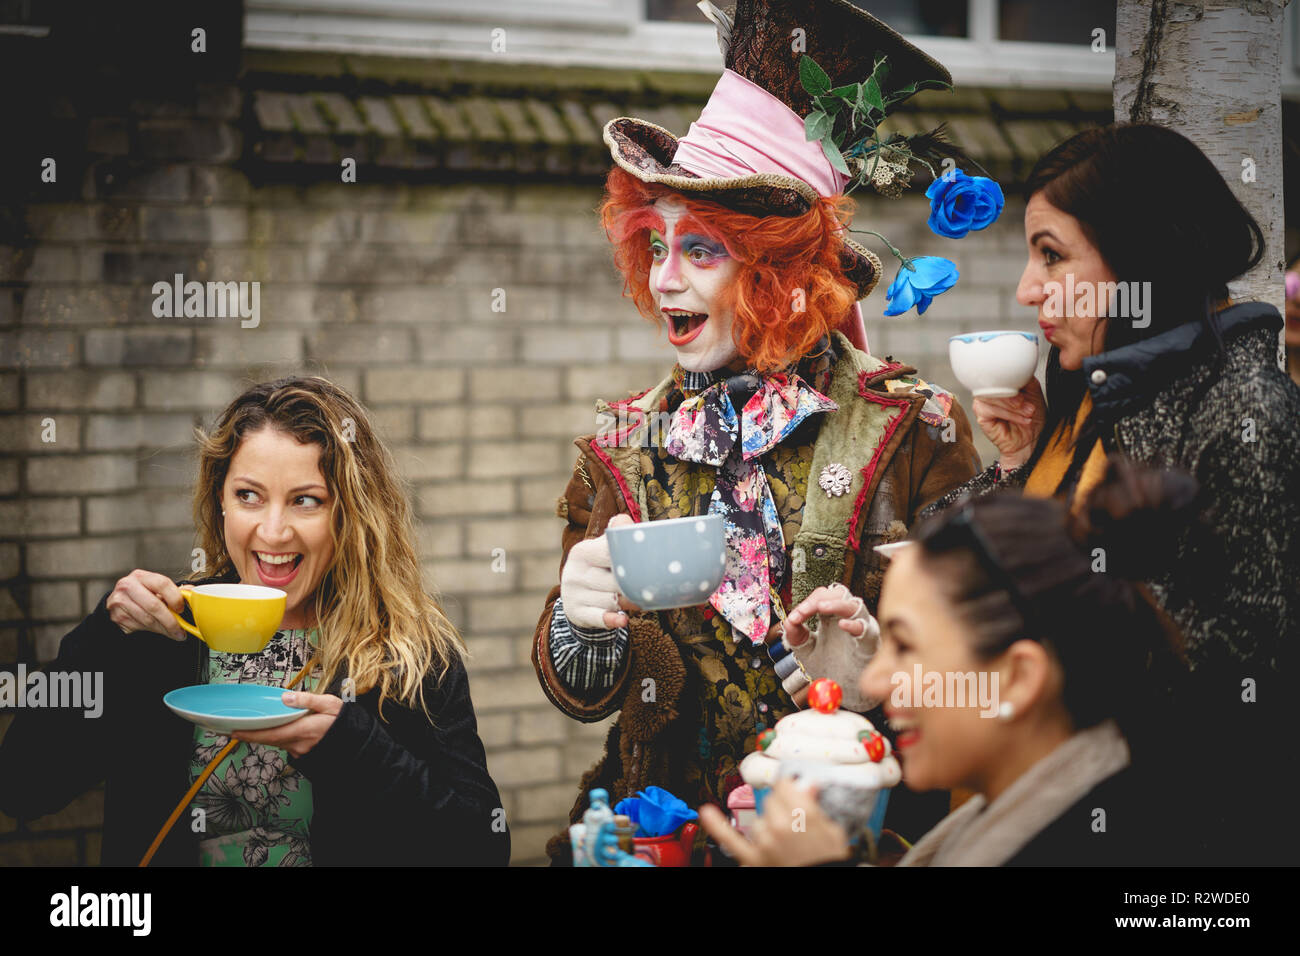 London, UK - February, 2019. A street artist impersonating the Hatter from Alice's Adventures in Wonderland in Portobello Road, Notting Hill. Stock Photo